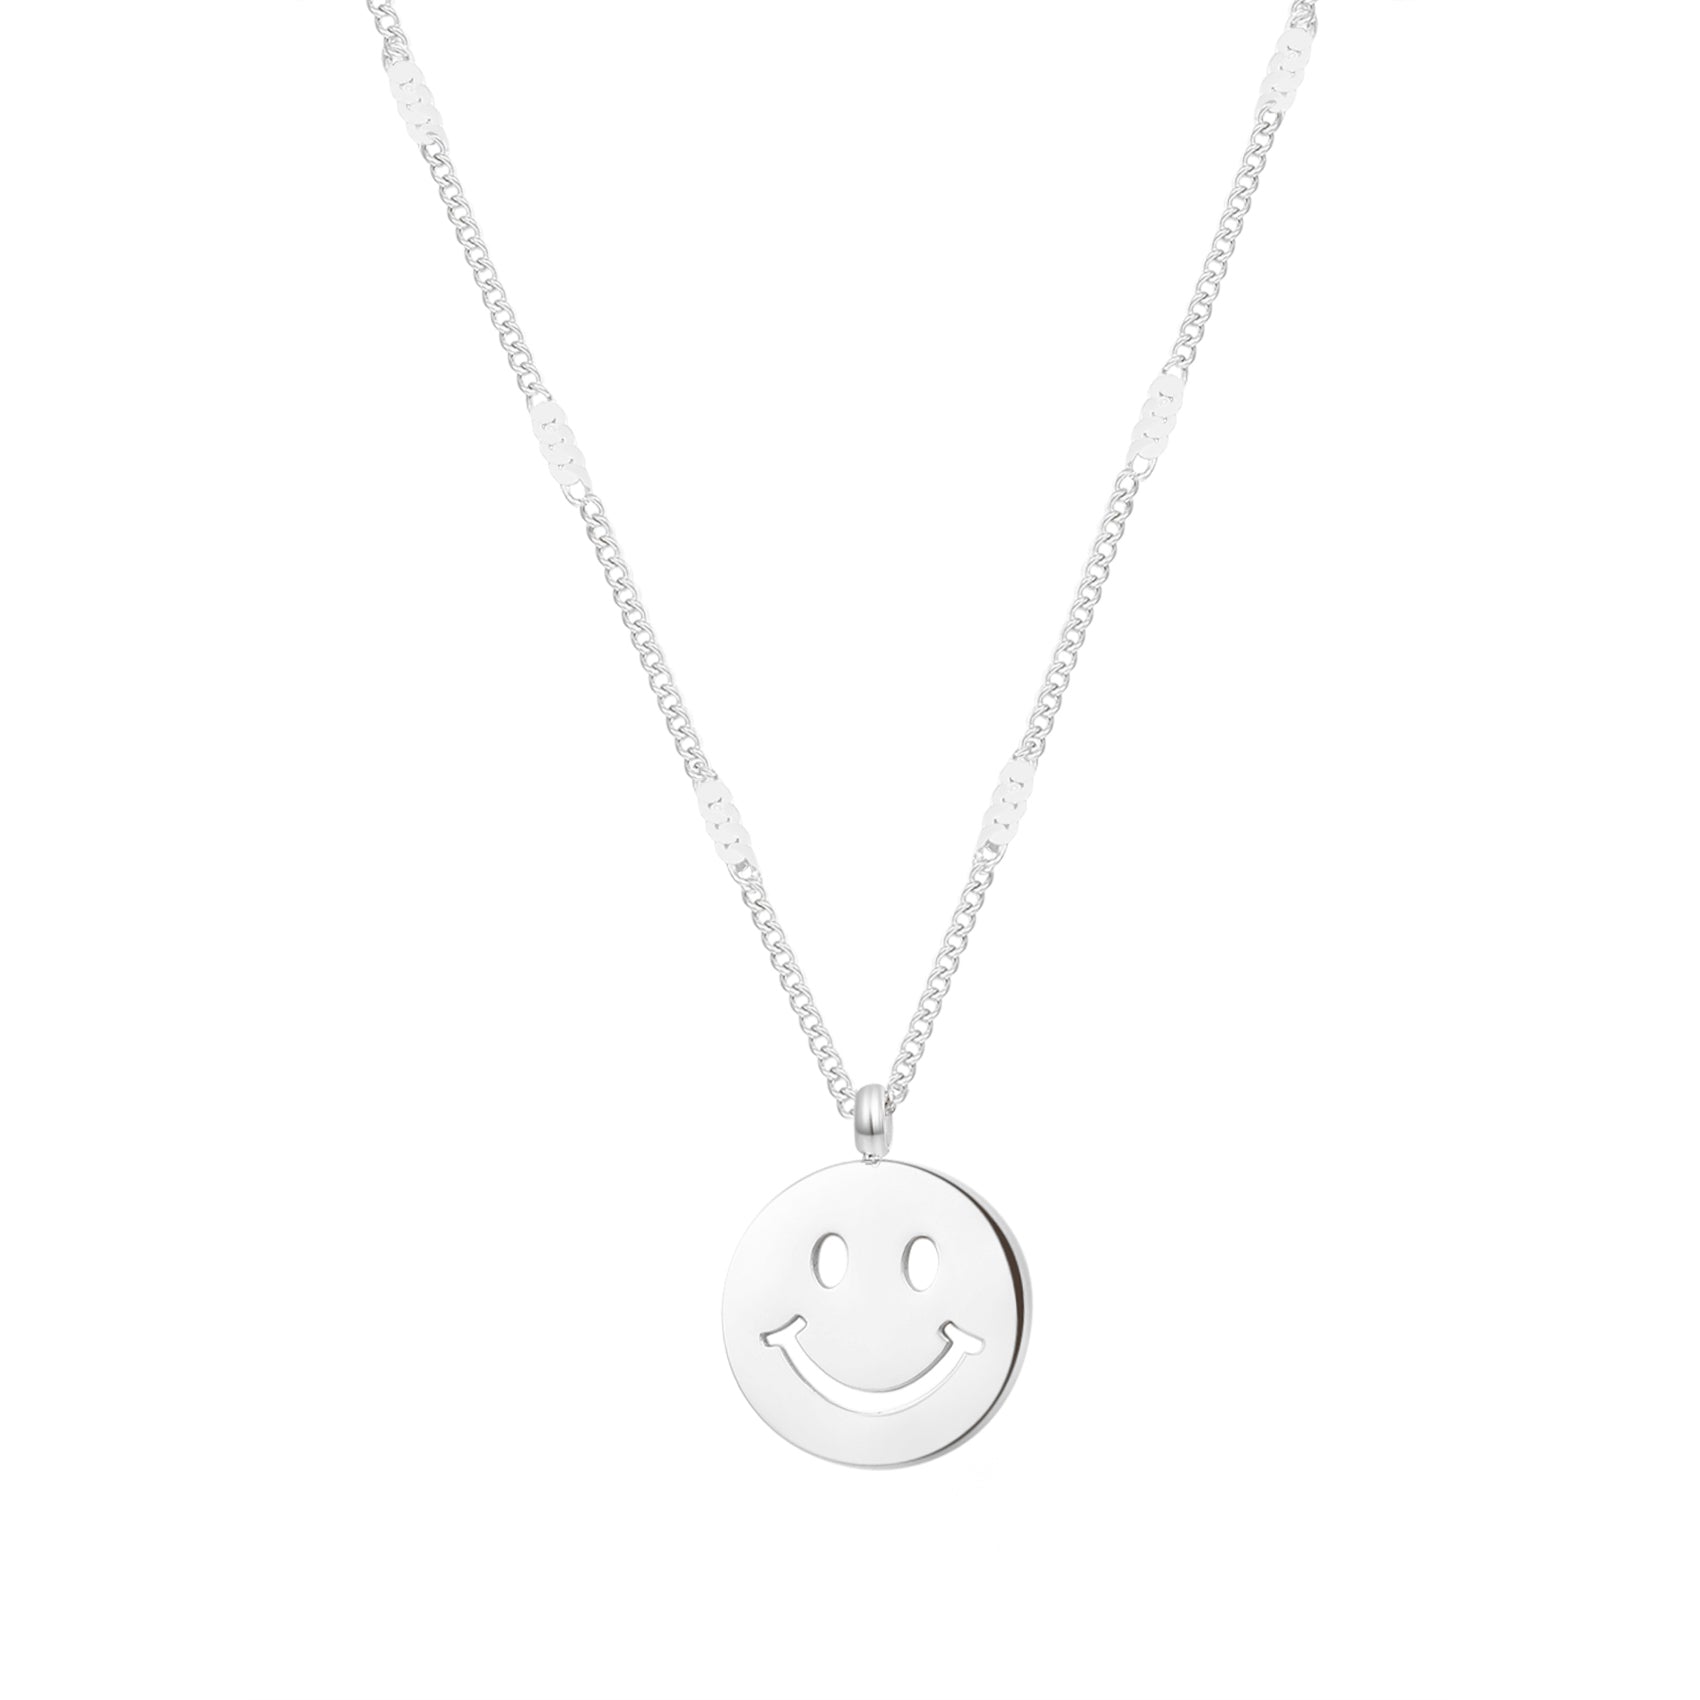 Smiley Face Pendant Necklace Sterling Silver